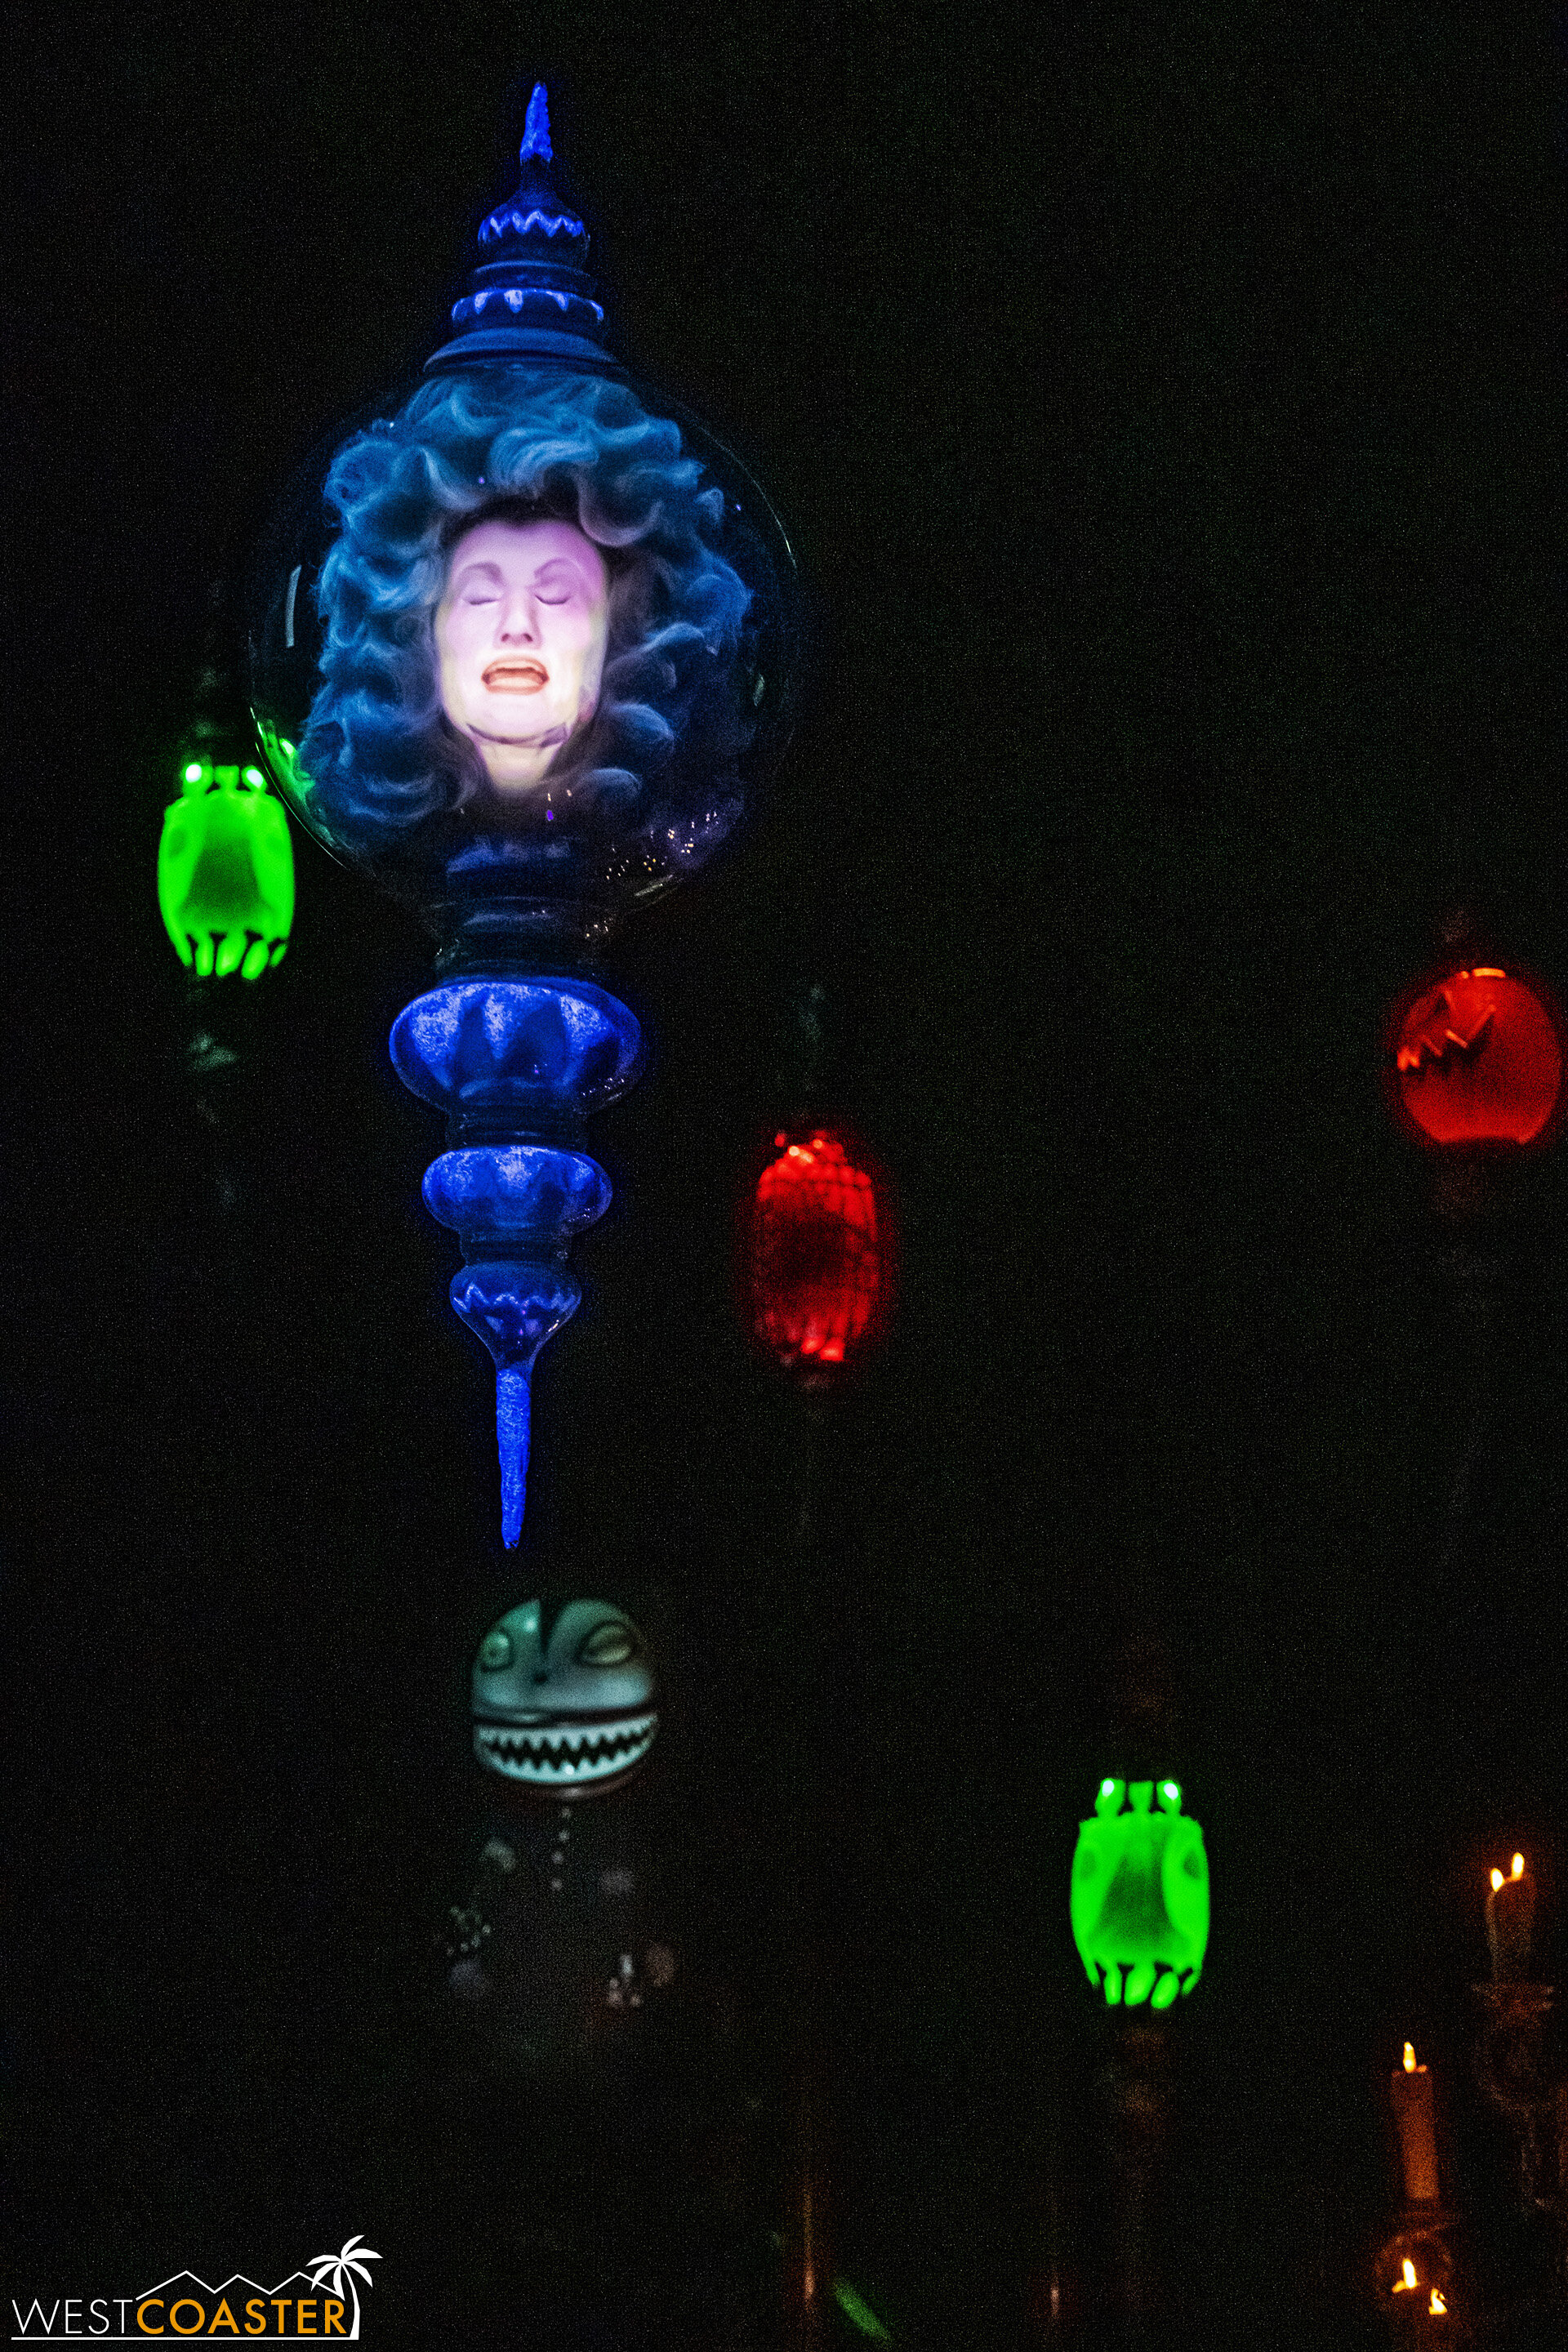  Madame Leota is a giant ornament in the Séance Room. 